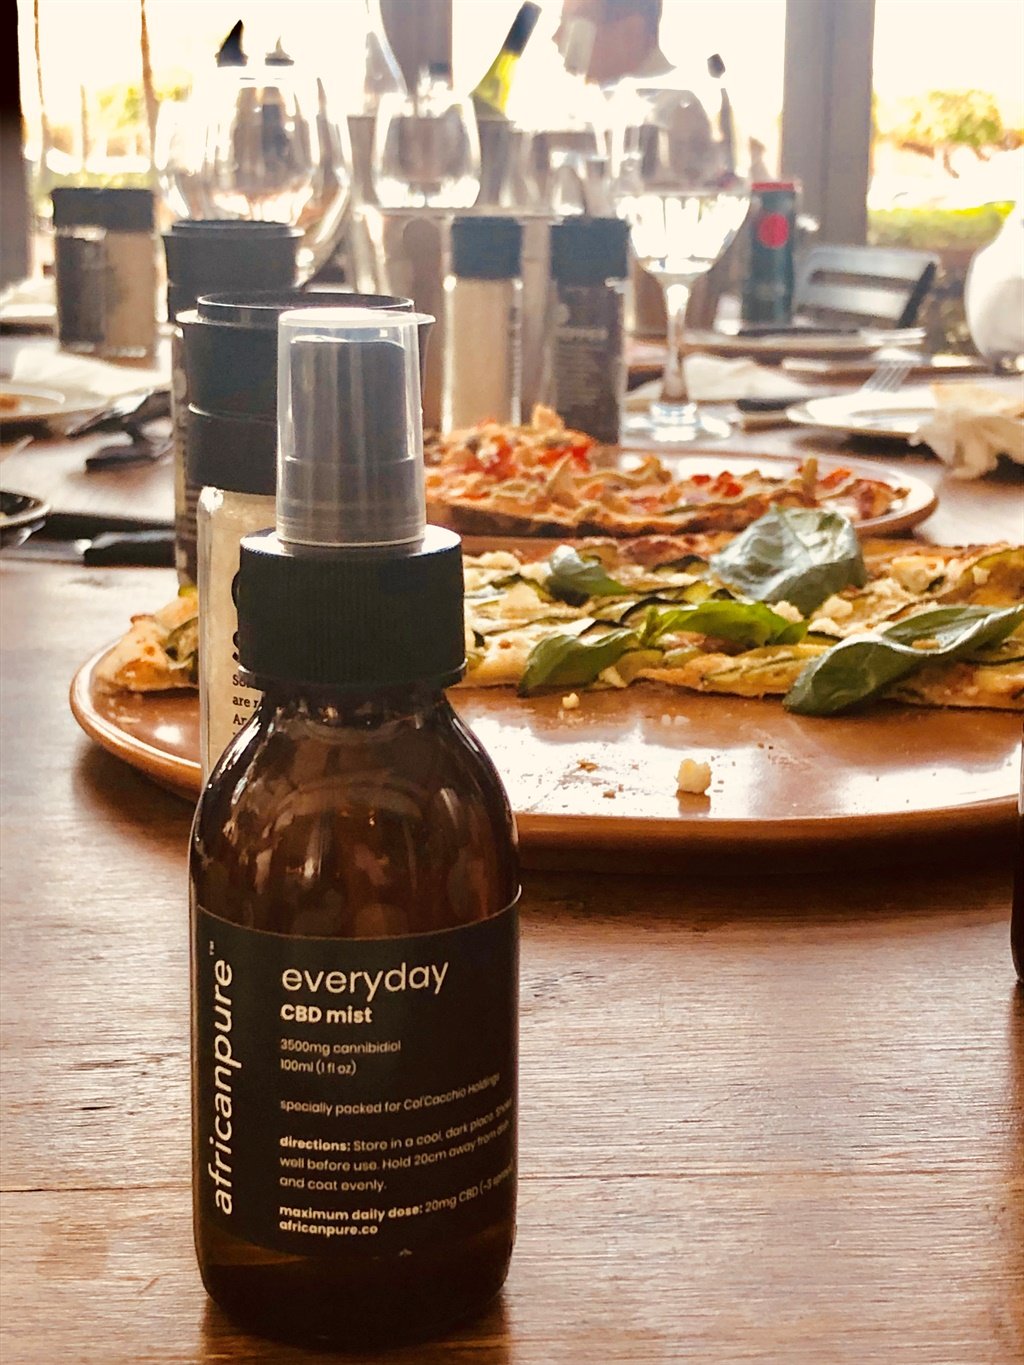 Only the healthy stuff: The CBD spray is the star of the day. We can't wait for the THC version. 
pictures:Phumlani S Langa 